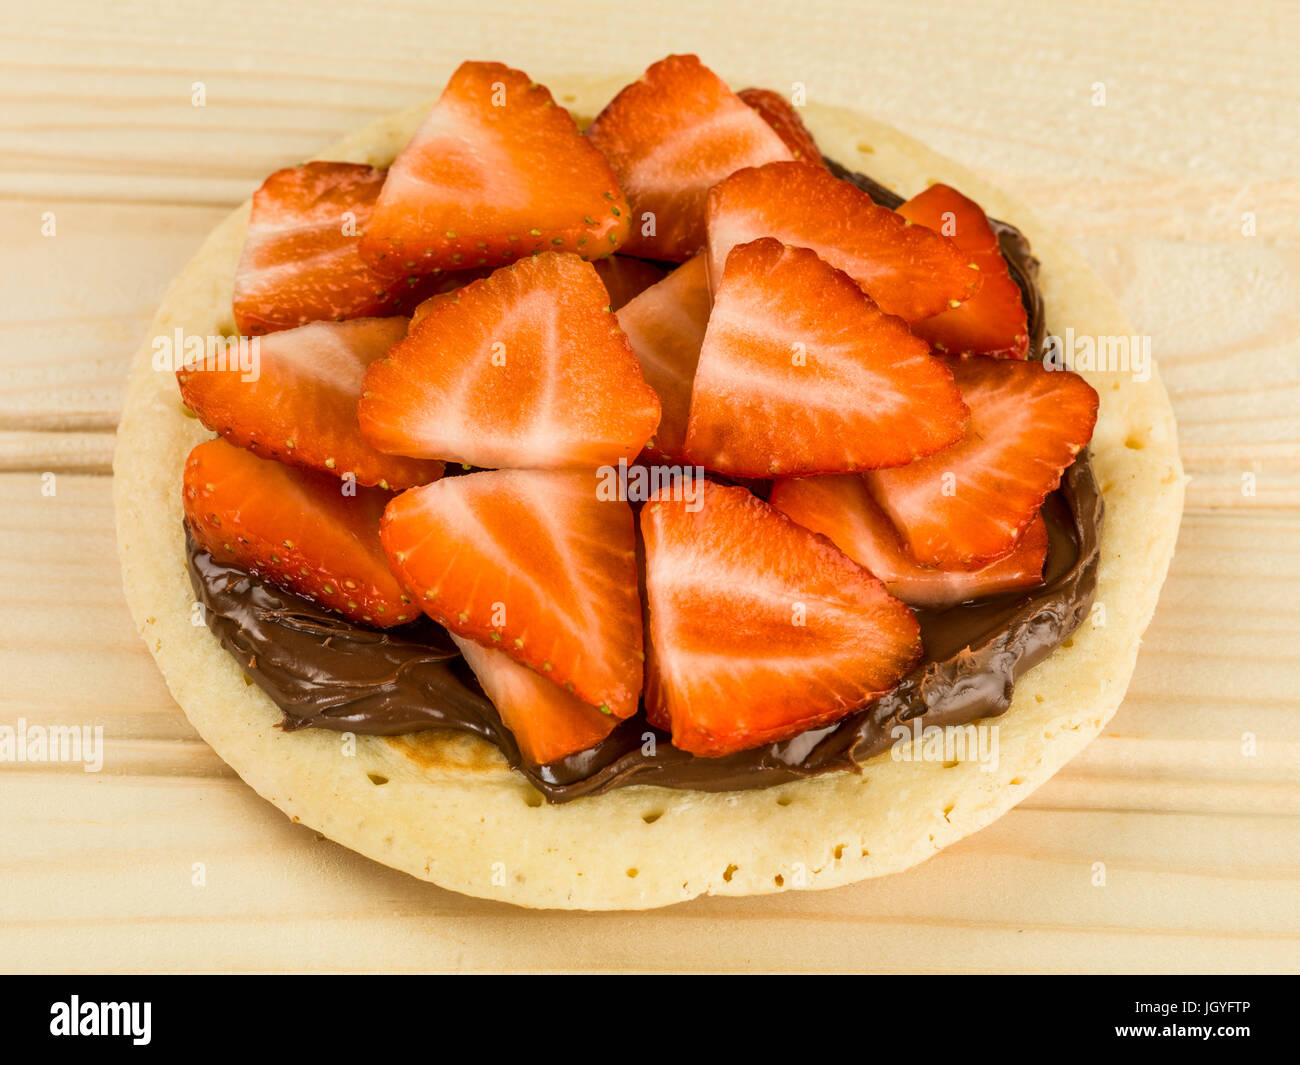 Pancake With Strawberries and Chocolate Spread Against A Pinewood Background Stock Photo